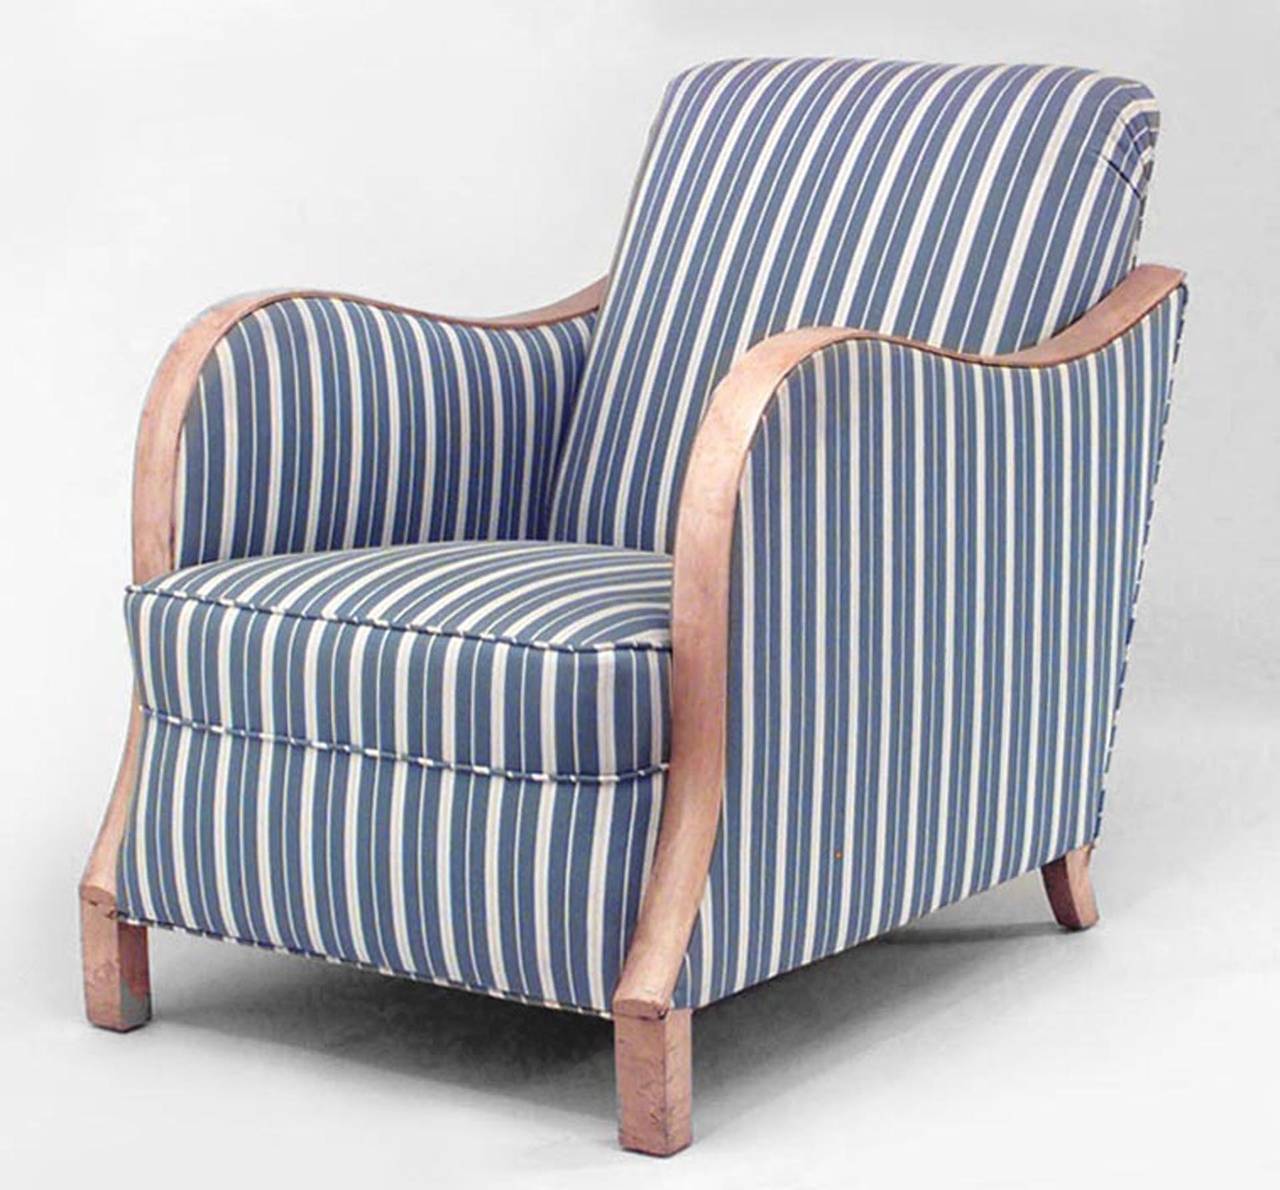 Pair of Swedish Biedermeier Art Deco-style (20th Century )club chairs with blue striped upholstery (PRICED AS Pair)
